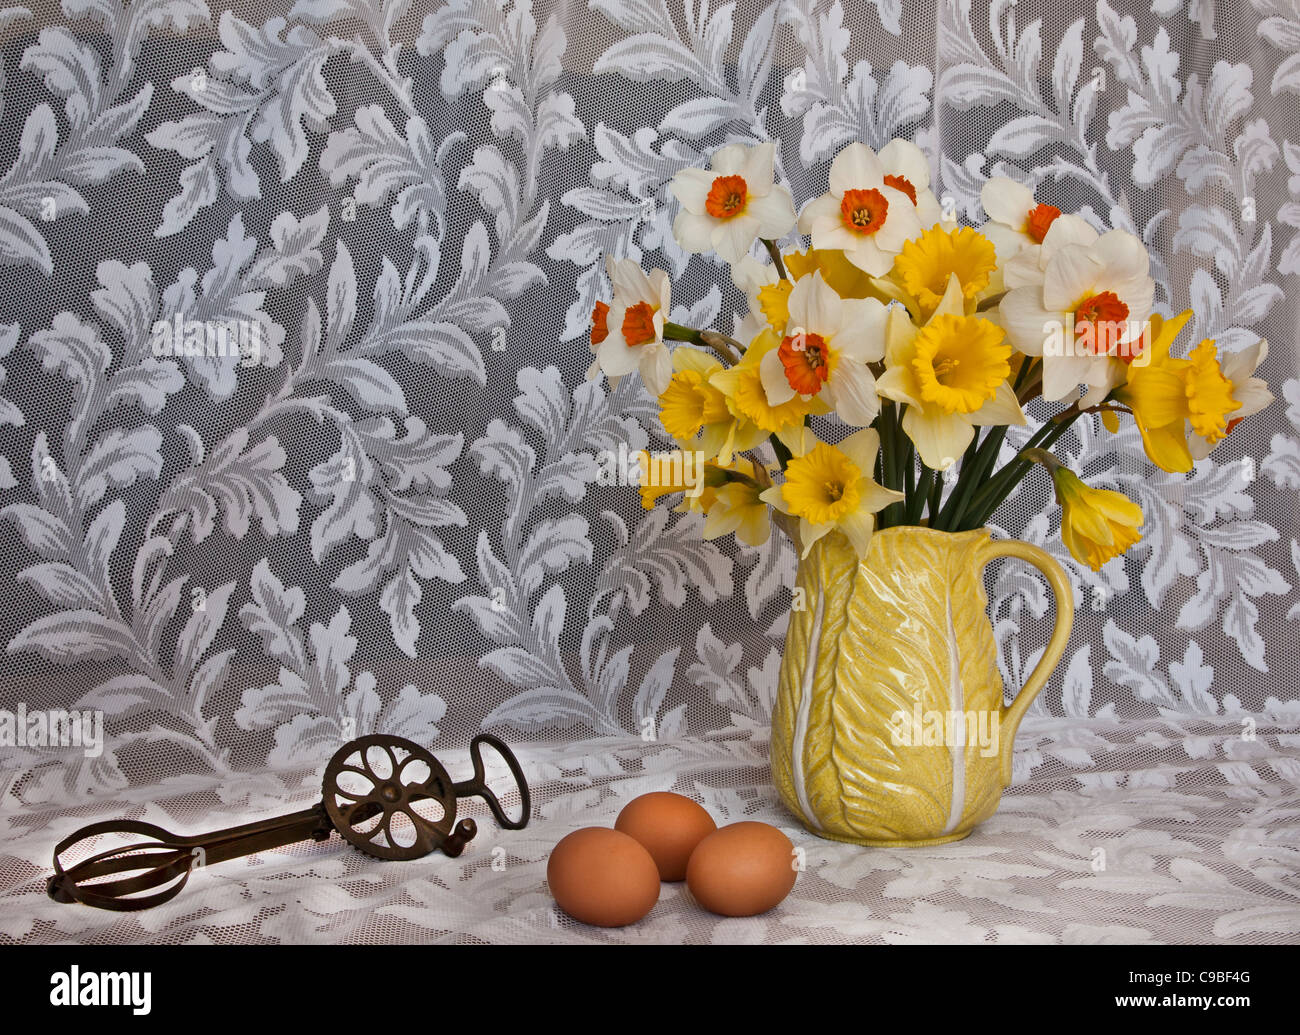 Still life spring Daffodil flowers in vase, vintage pitcher, pots,antique eggbeater cooking utensil, 3 brown eggs, white lace Colourful baking tools Stock Photo